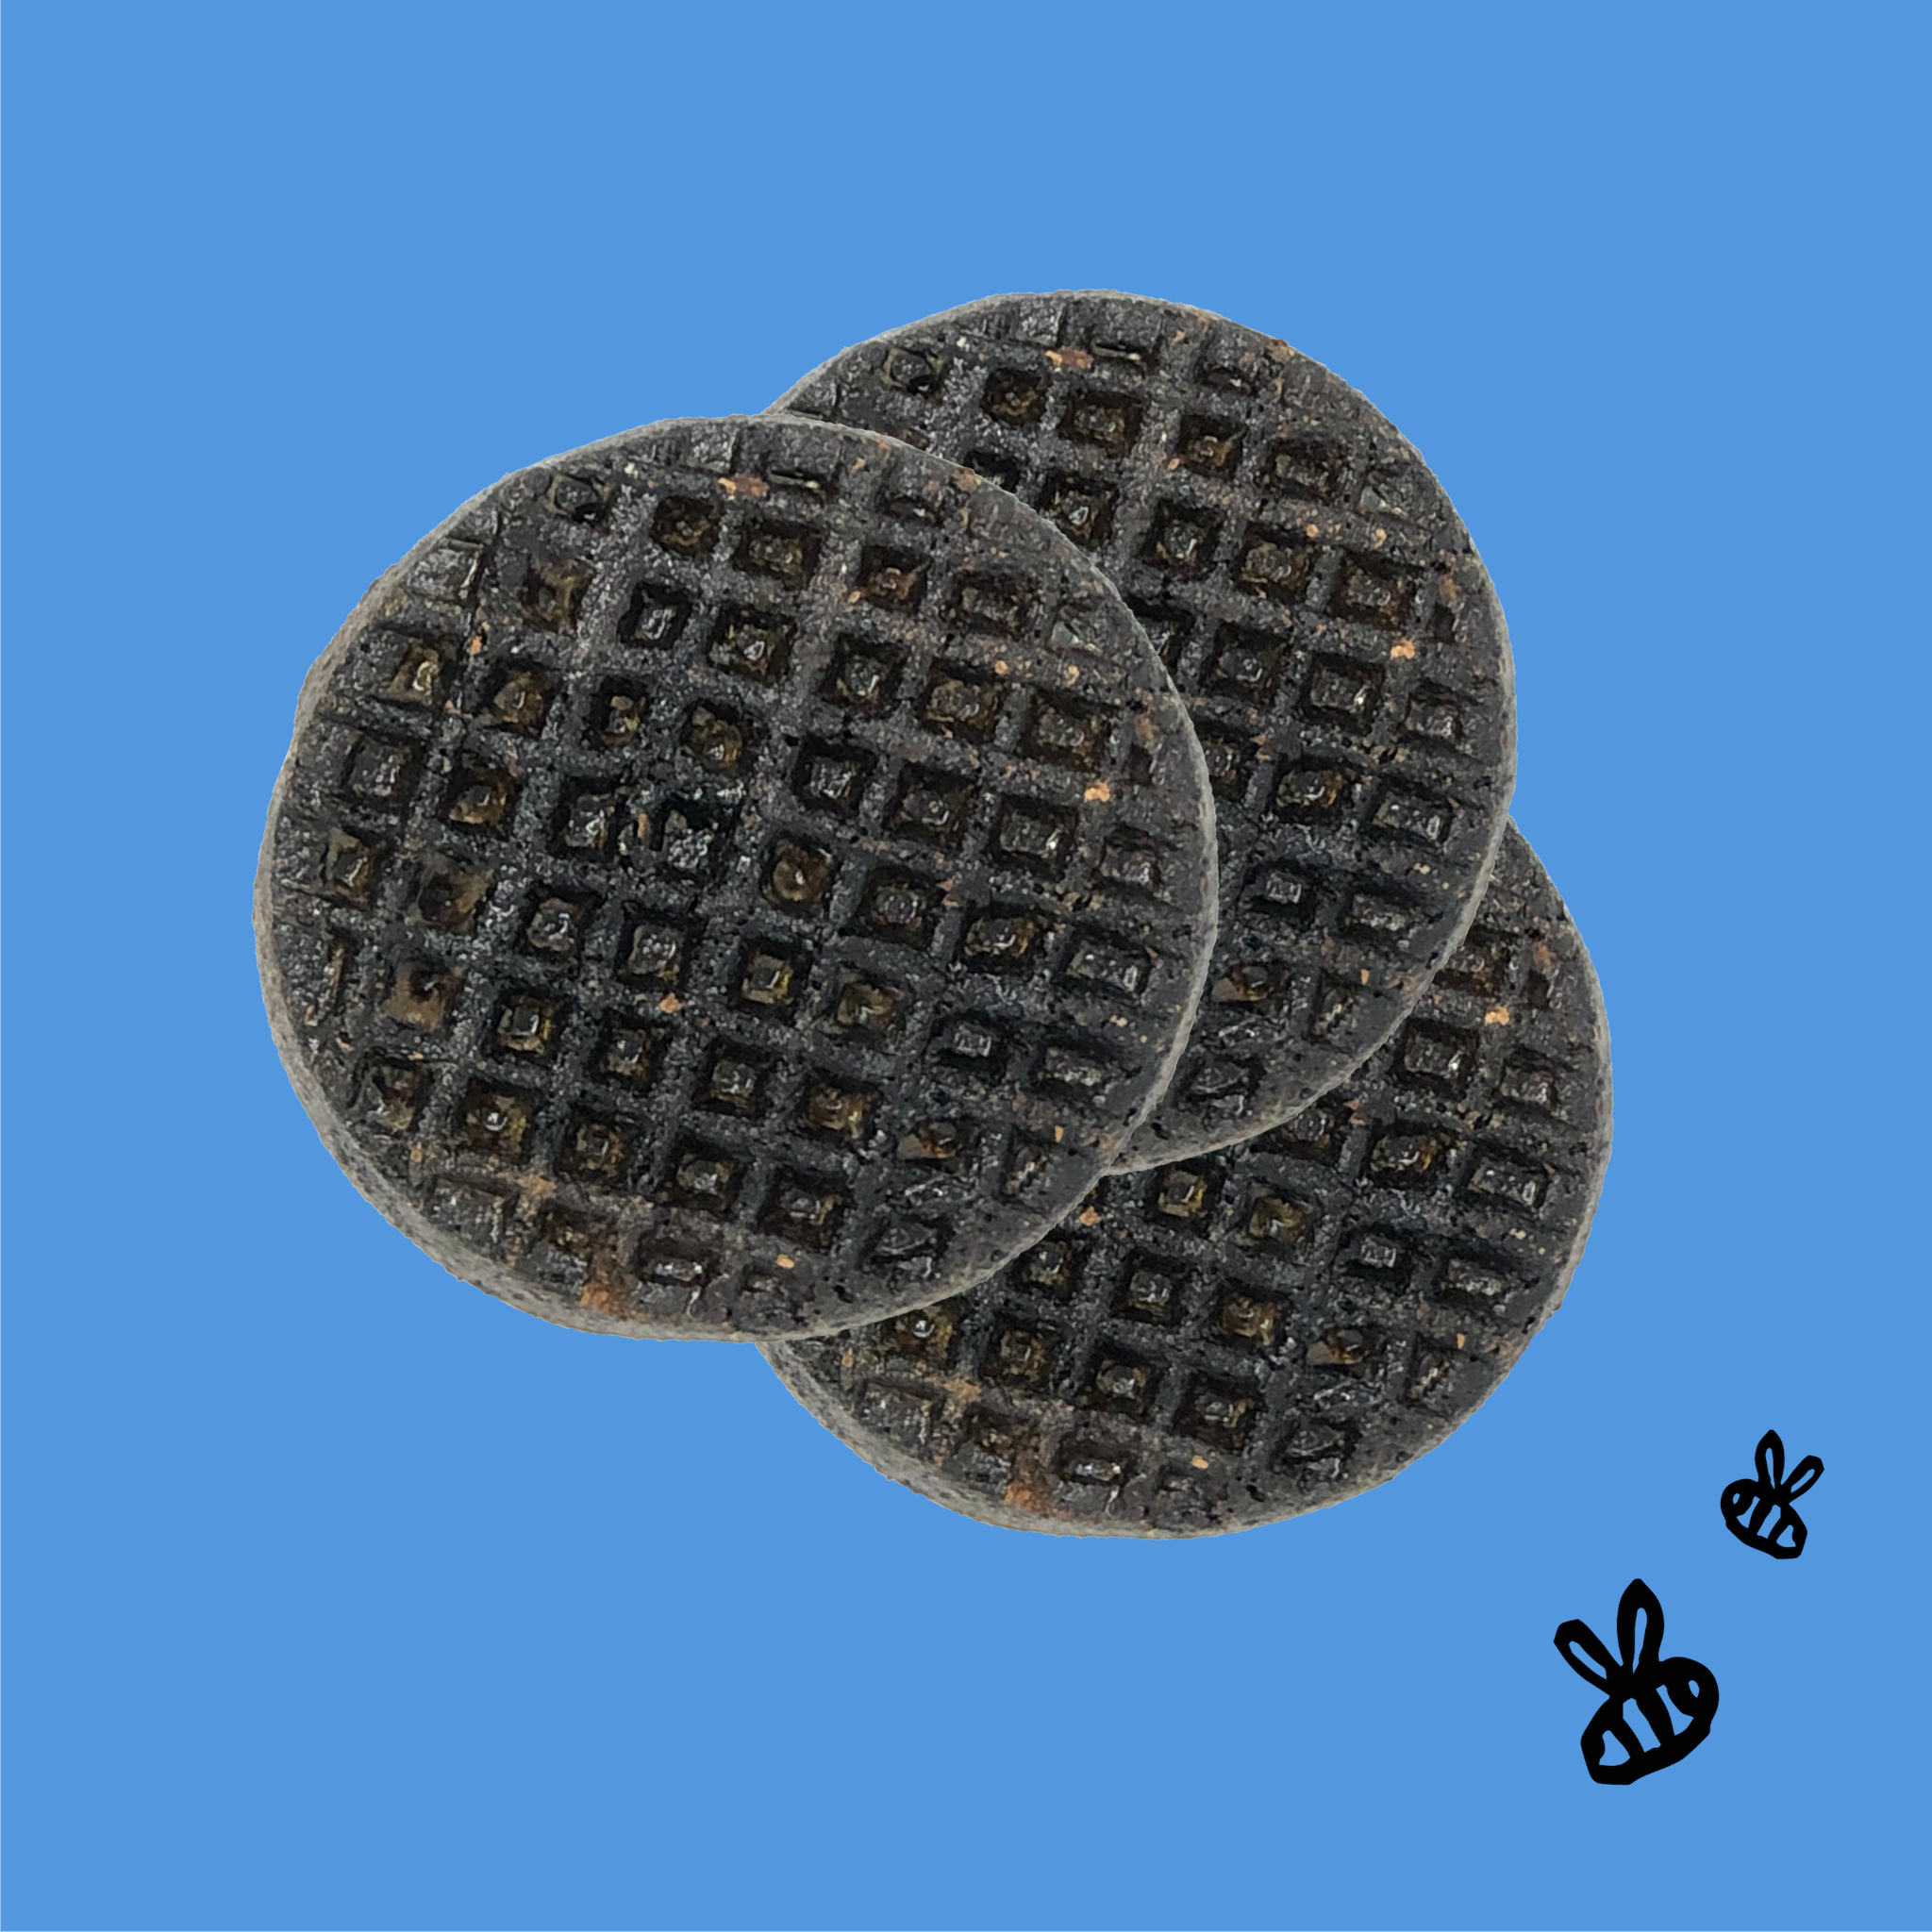 3 round buffalo liver recipe wafers for dogs on a bright blue background 2 black bees right corner